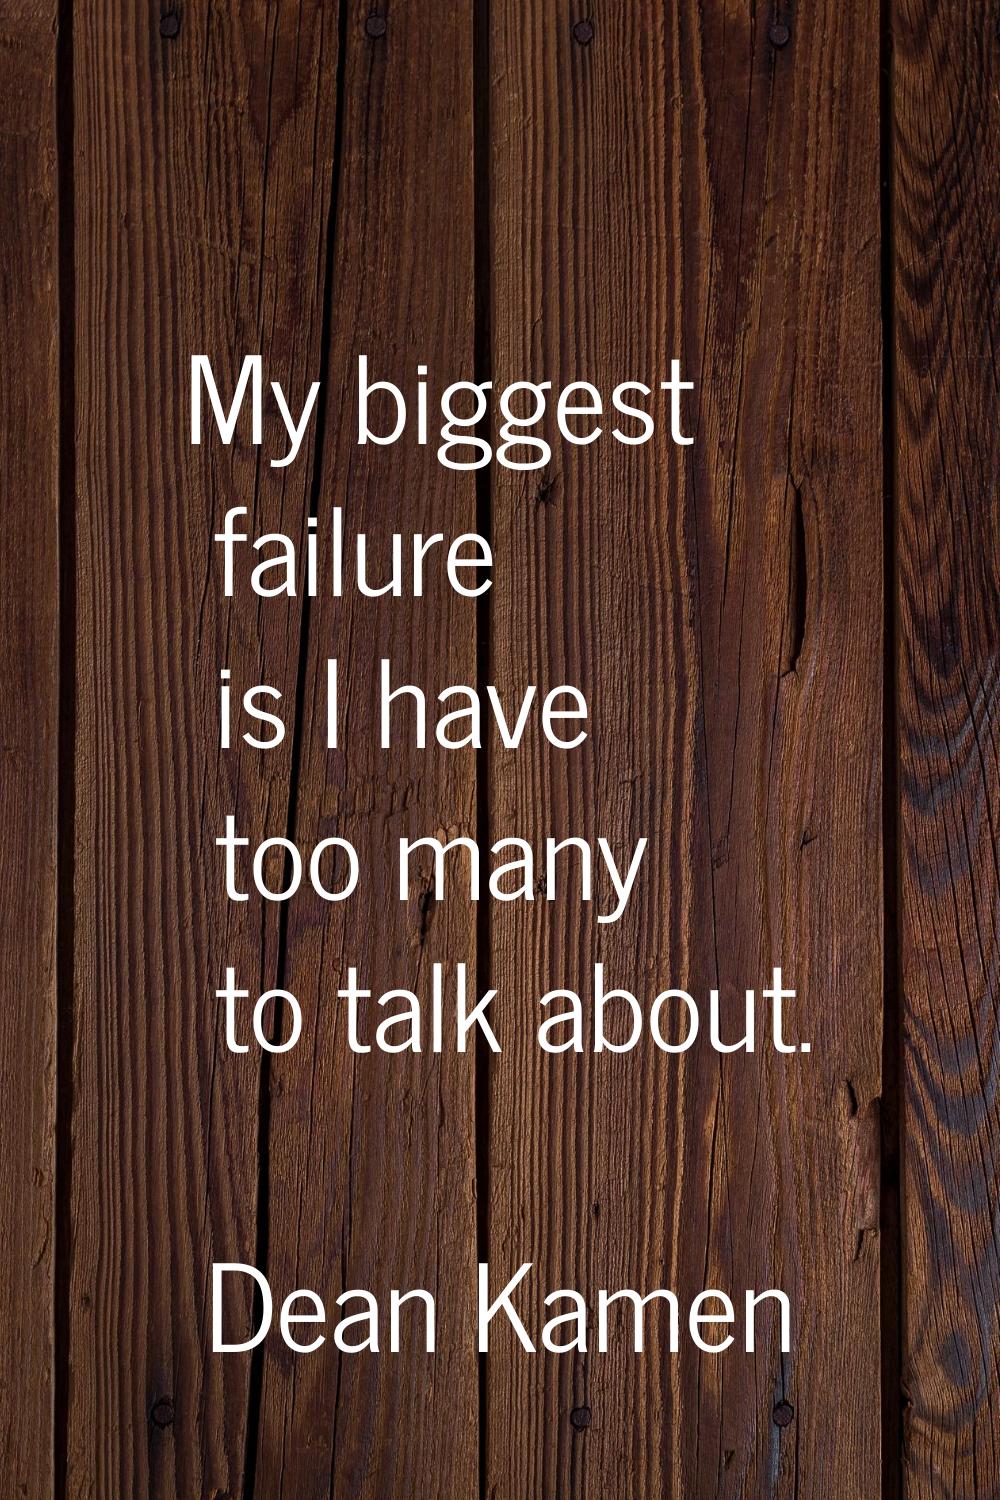 My biggest failure is I have too many to talk about.